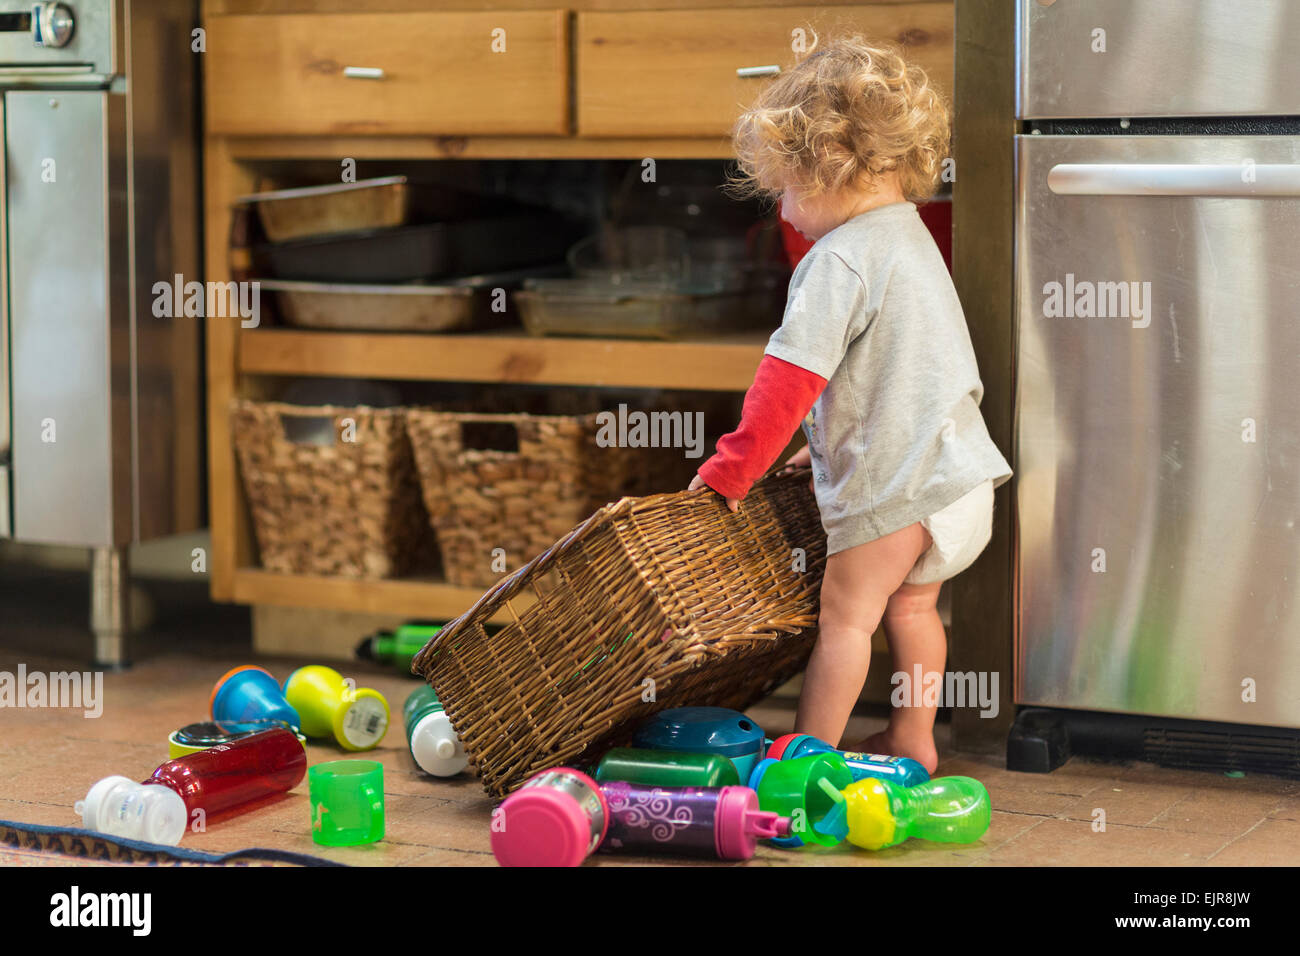 Caucasian baby boy playing with toys and basket Stock Photo